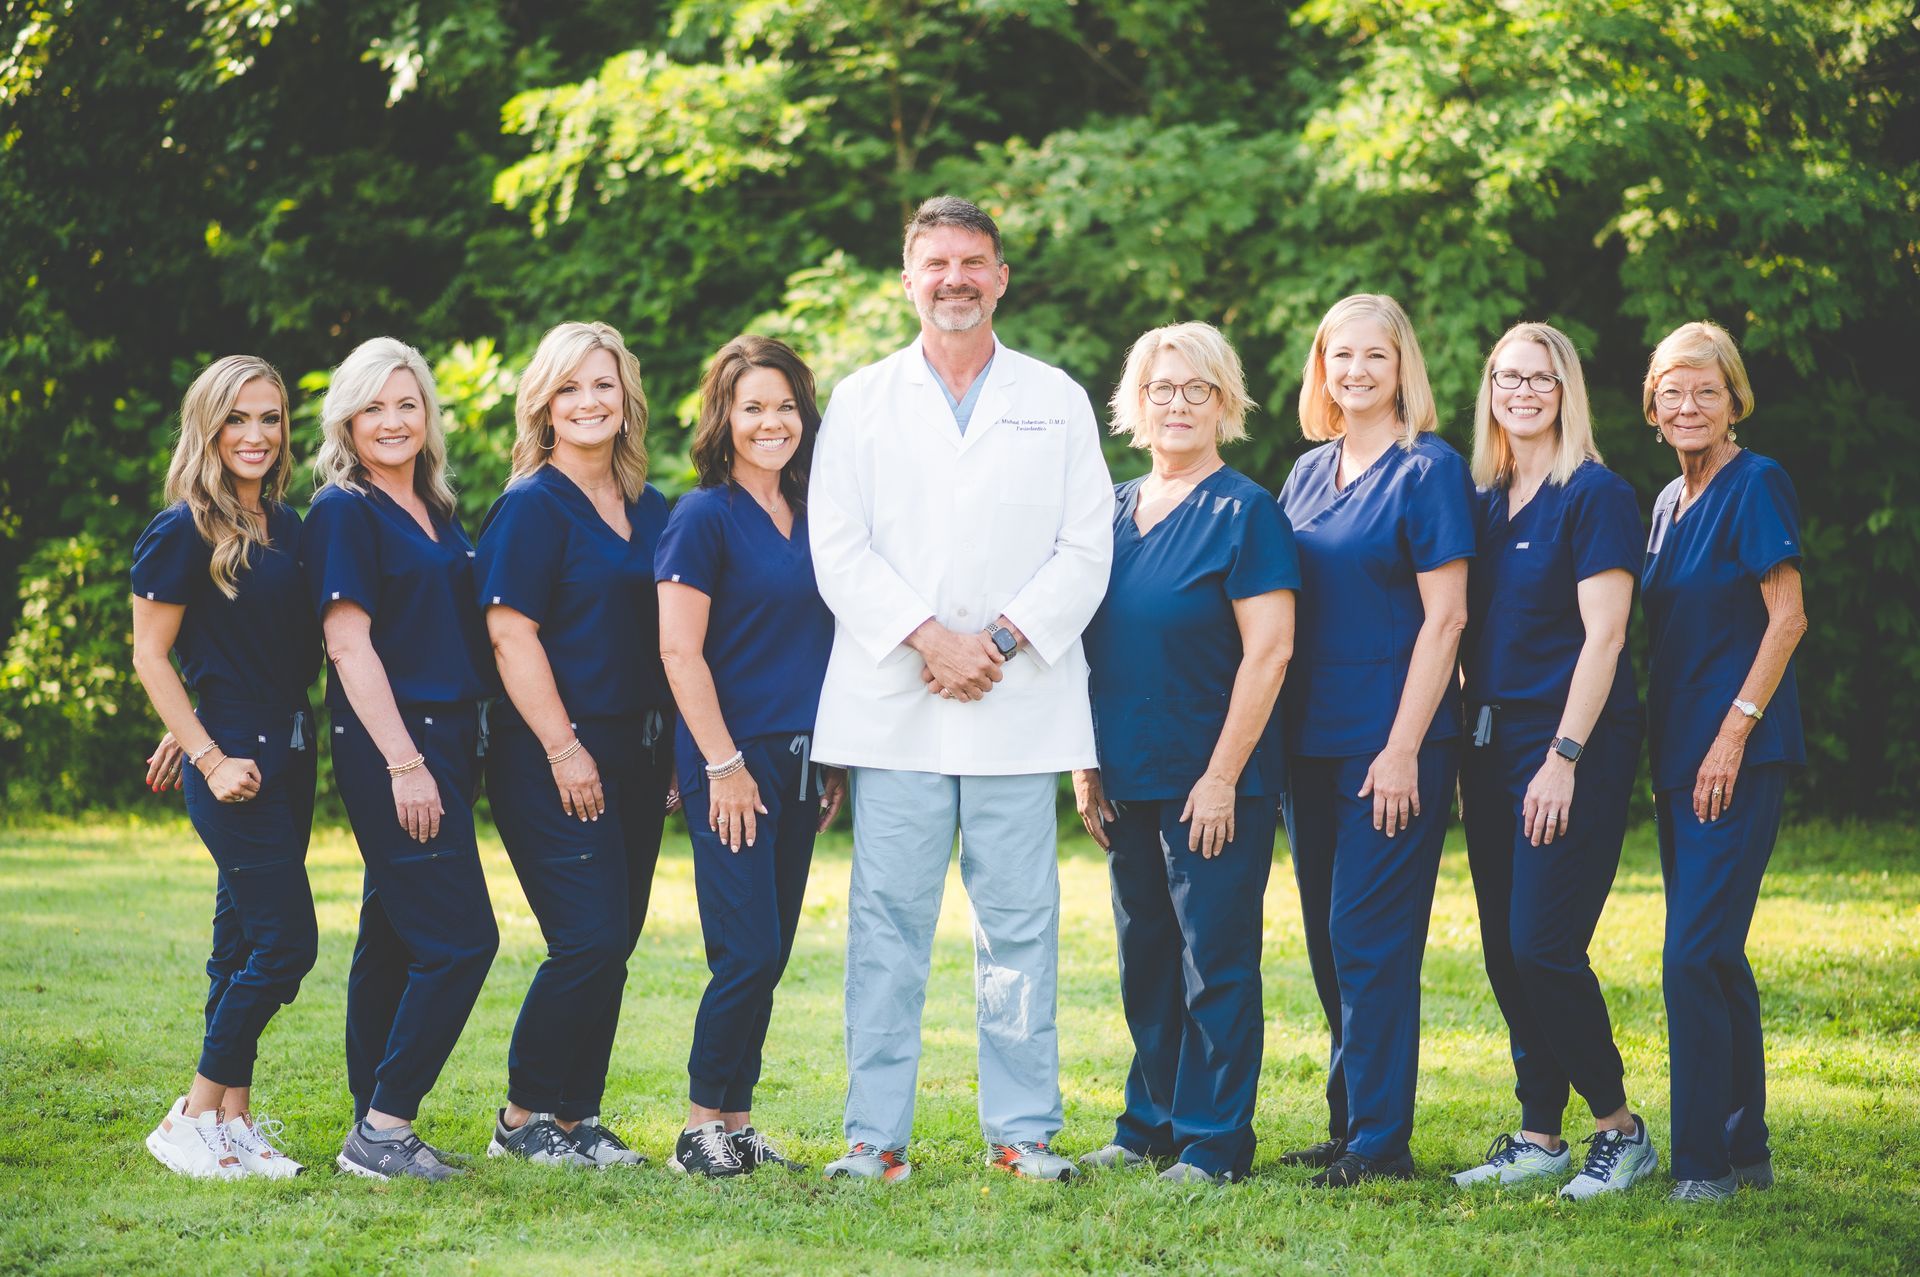 North Mississippi Periodontics and Implant Dentistry staff